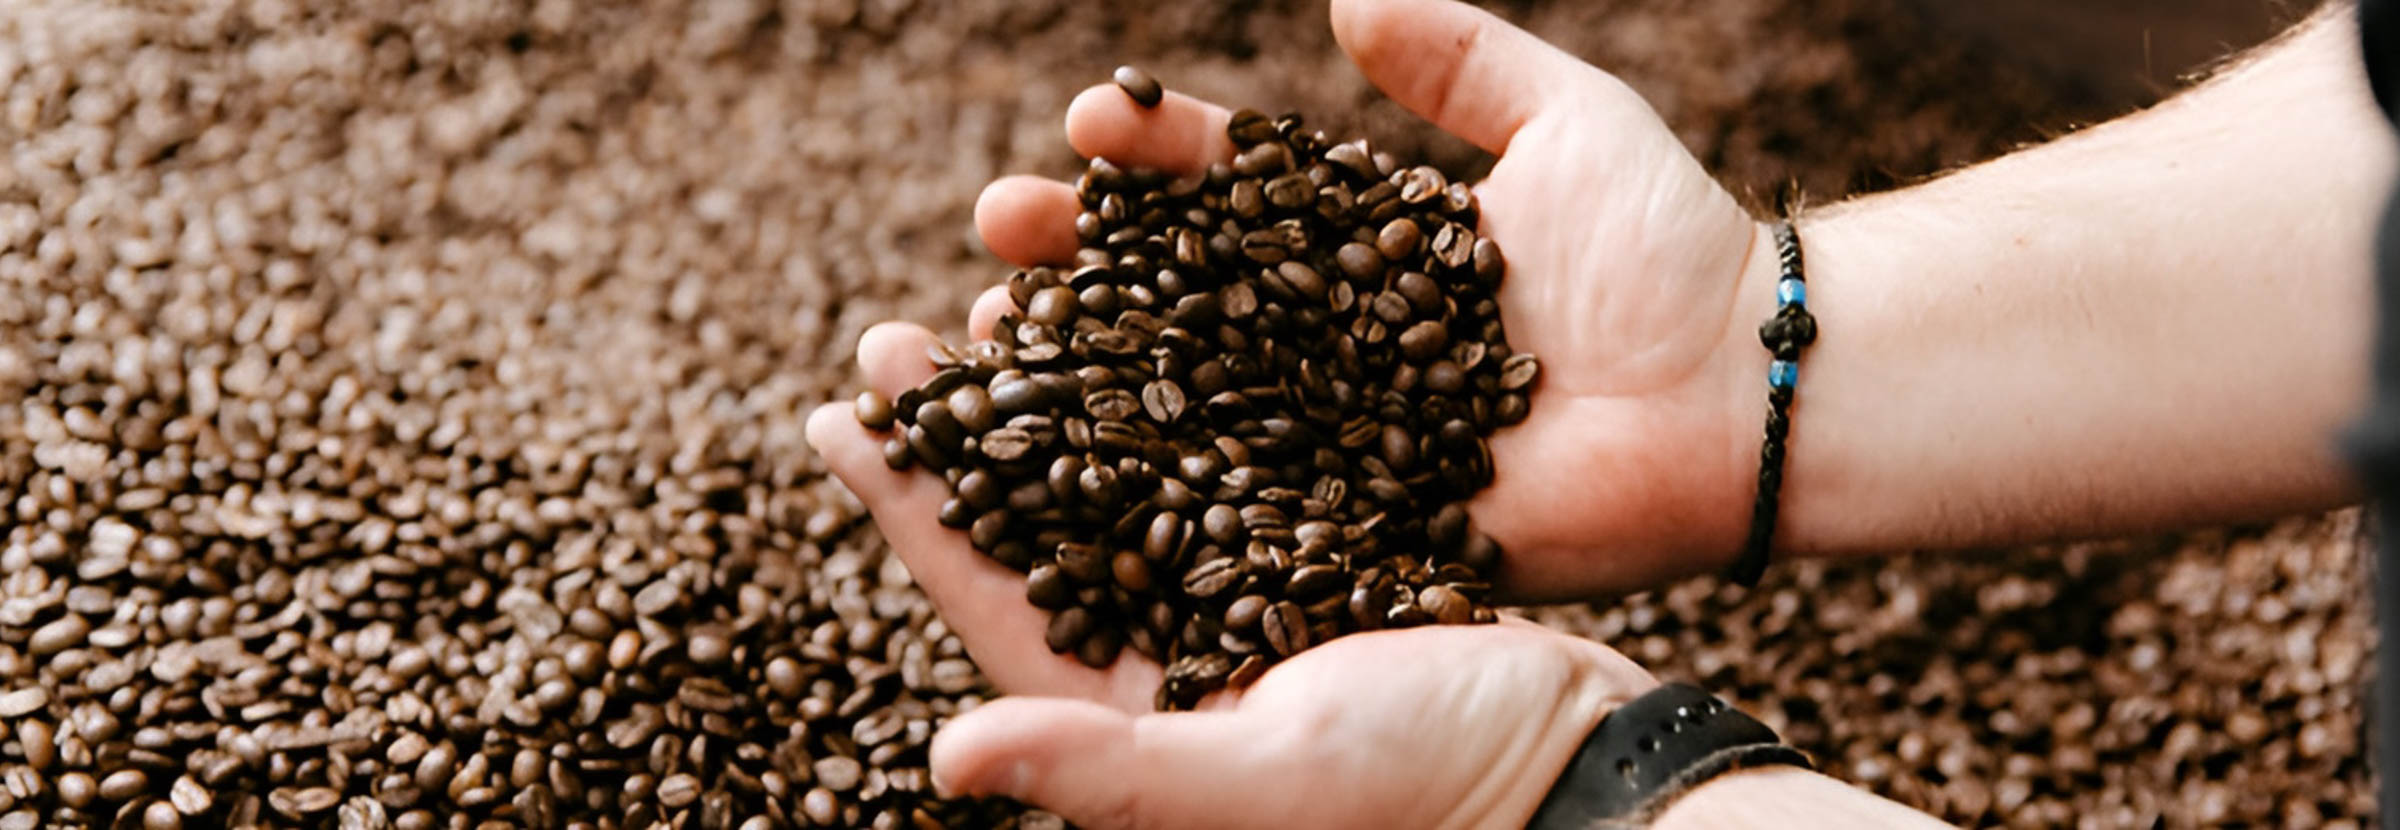 A coffee roaster holds roasted coffee in their hands.